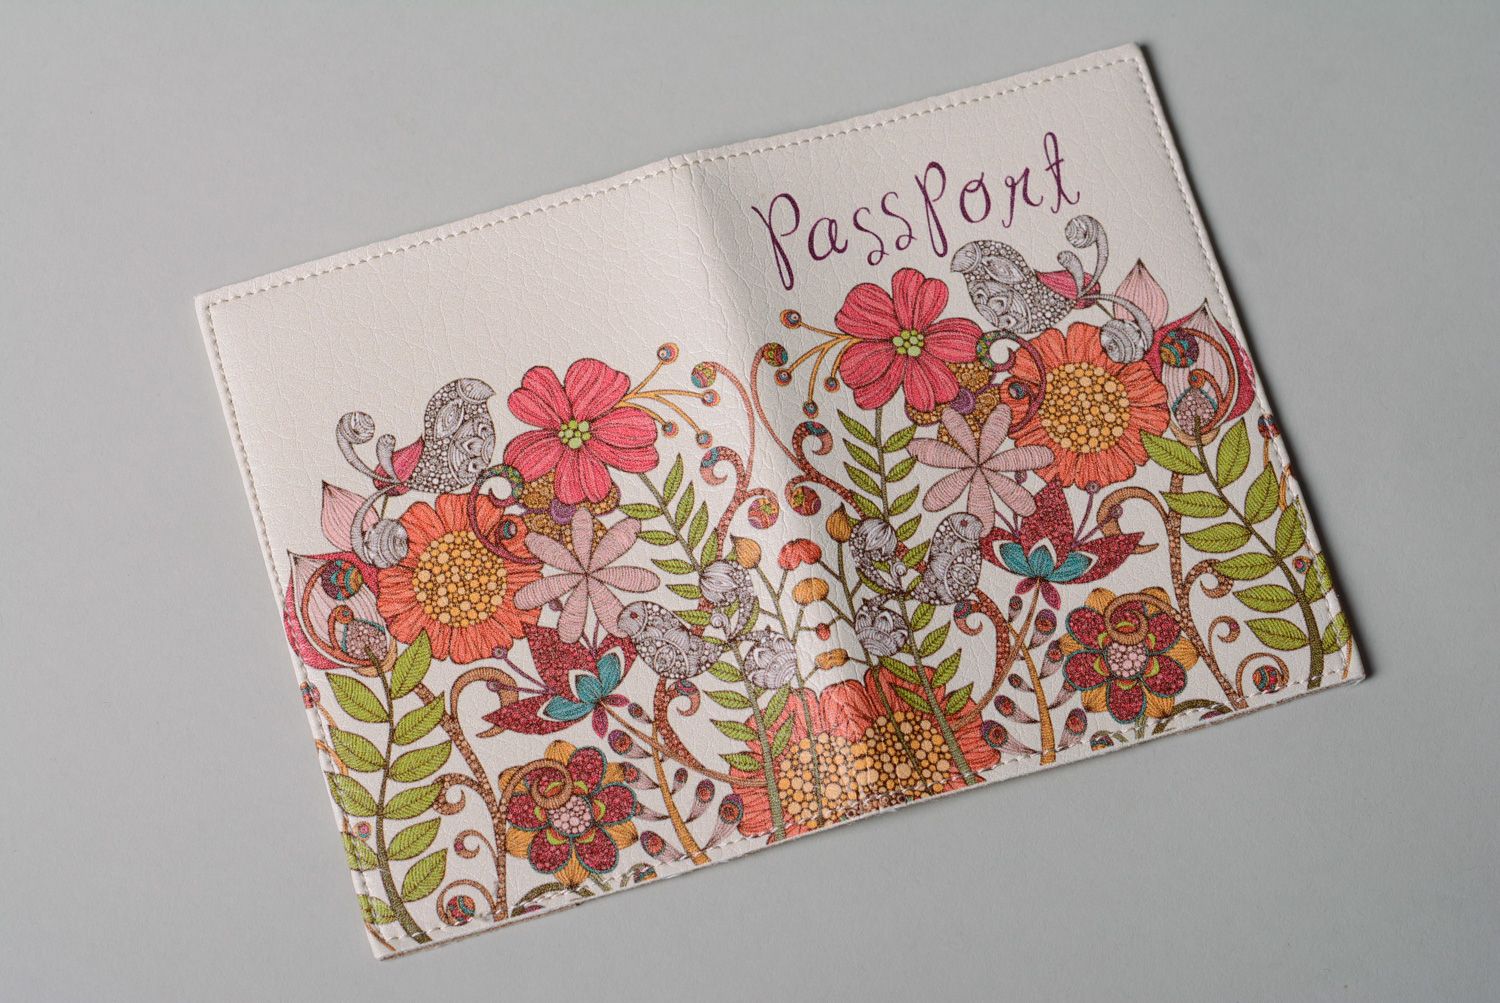 Homemade leather passport cover with flower print photo 2